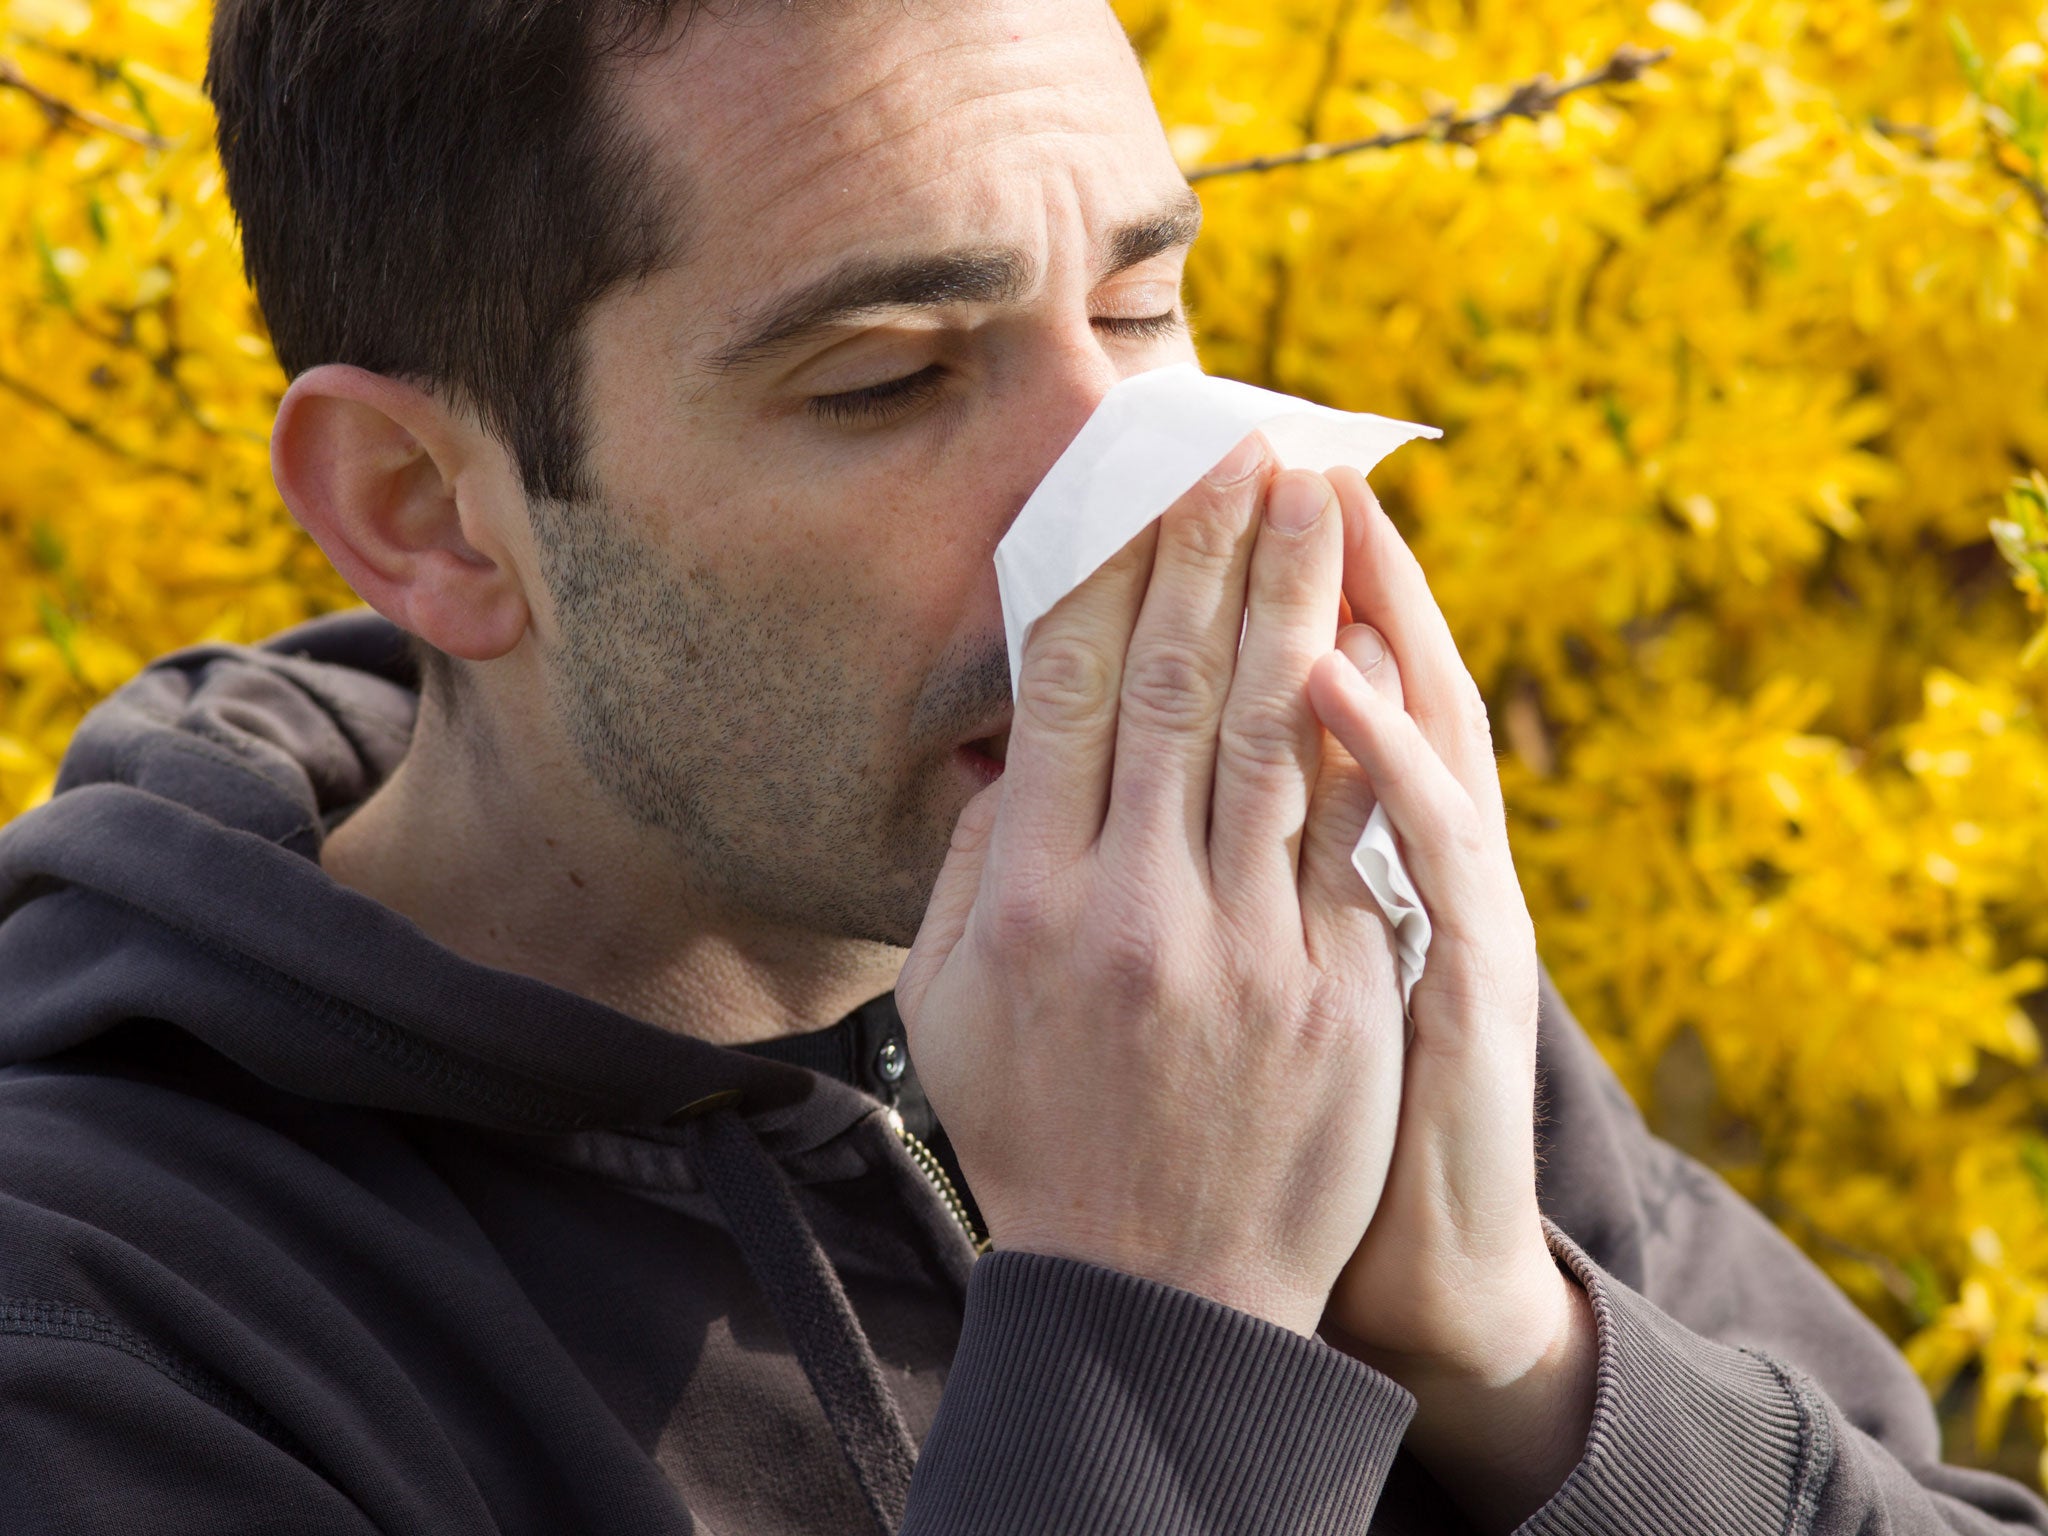 With autumn, come the cold and flu